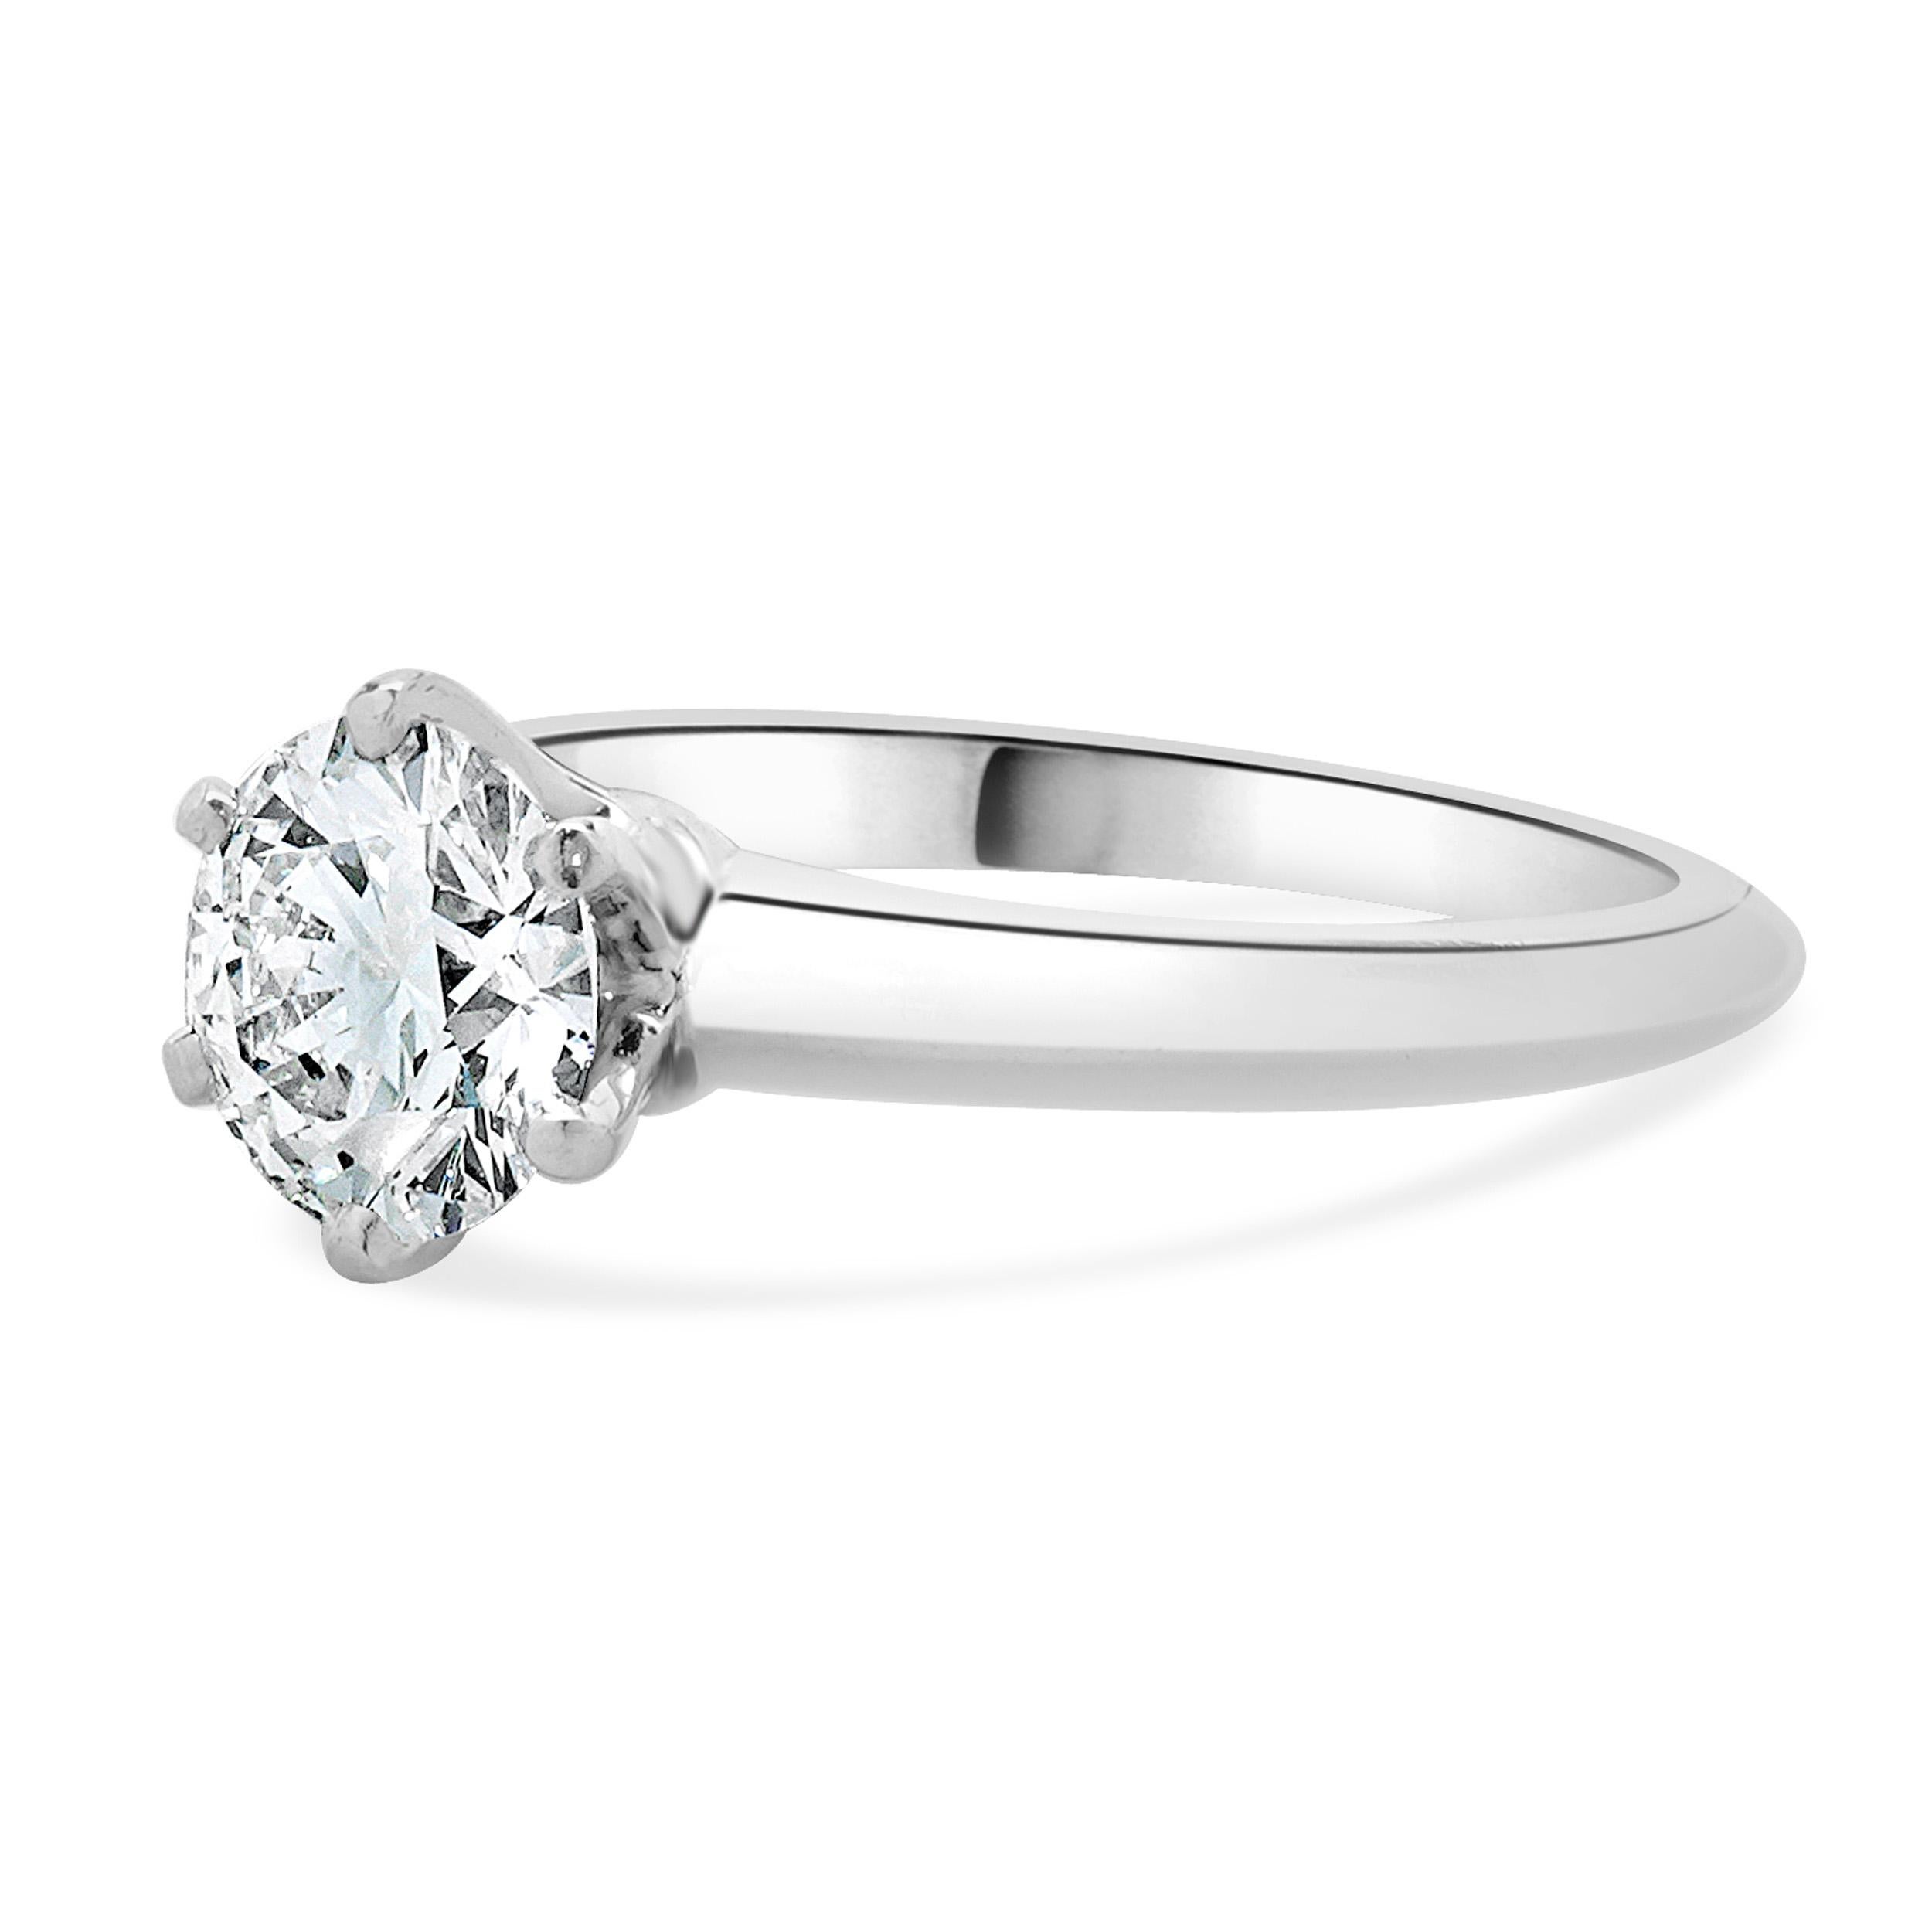 Tiffany & Co. Platinum Diamond Solitaire Ring In Excellent Condition For Sale In Scottsdale, AZ